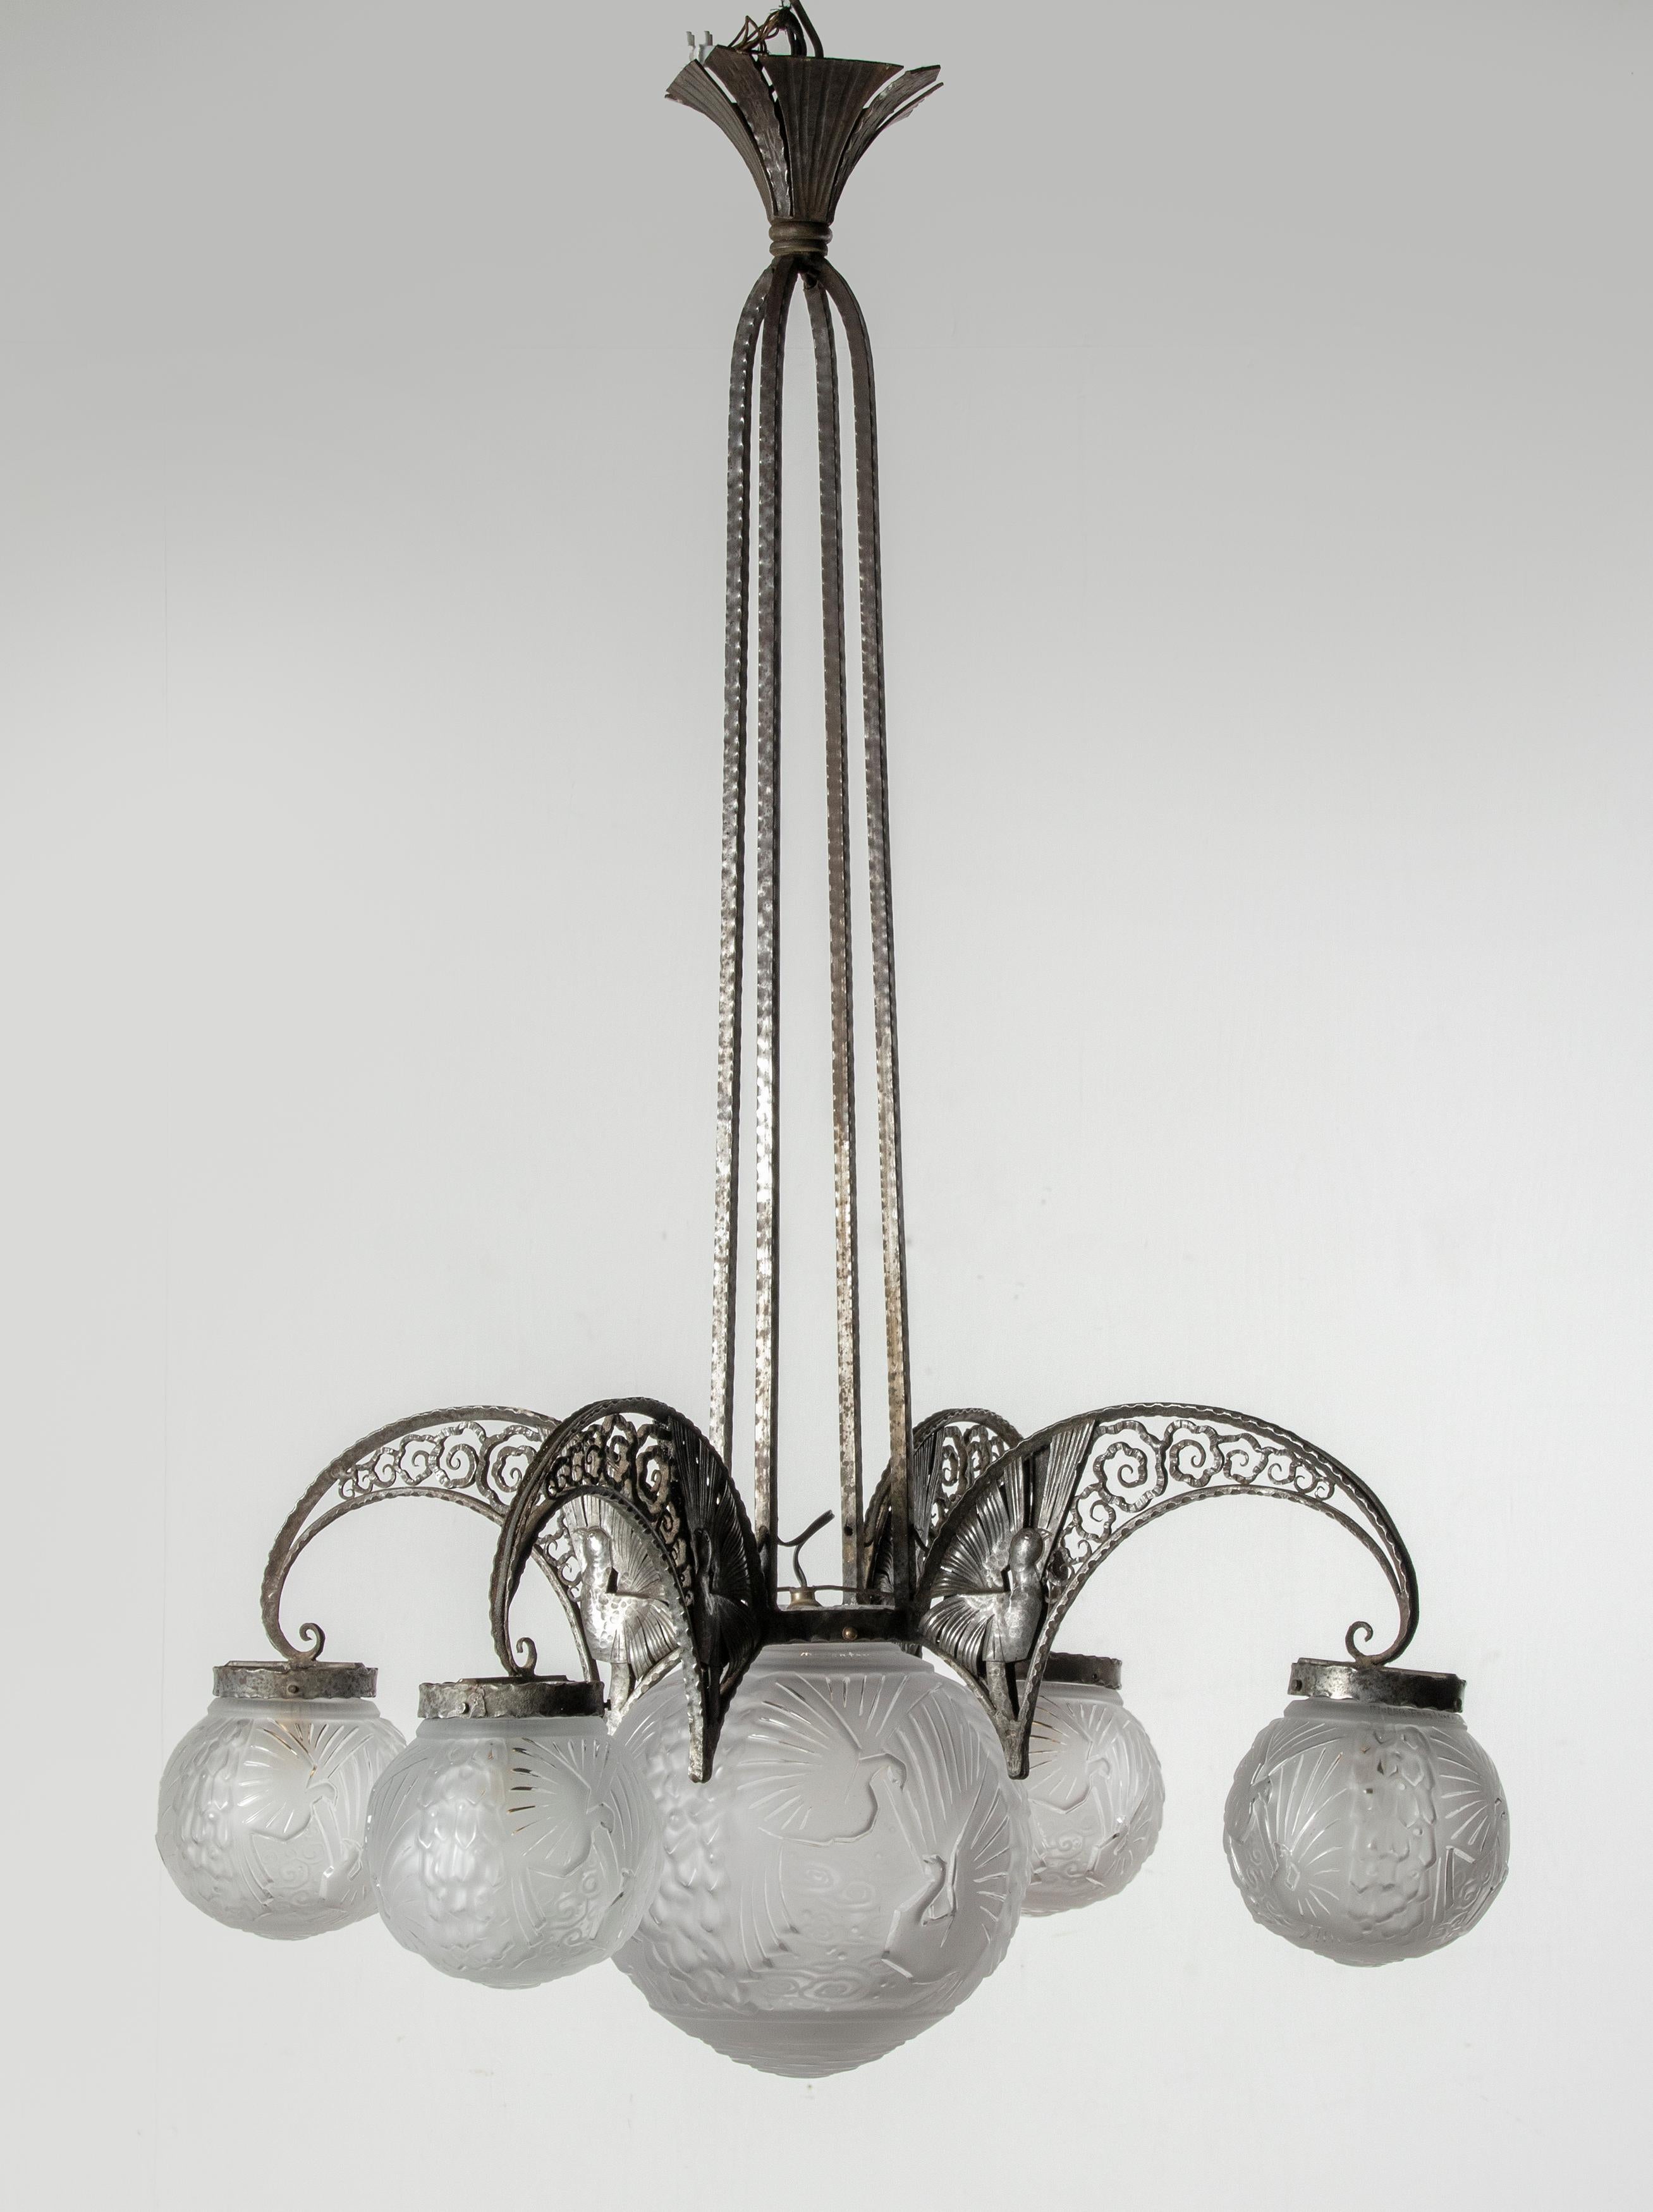 A large and beautifully designed chandelier from the French Art Deco period. The lamp is made of wrought iron in a very refined way. The lamp is embellished with peacocks on each arm on both sides. It has 5 lights with the original bayonet (B22)